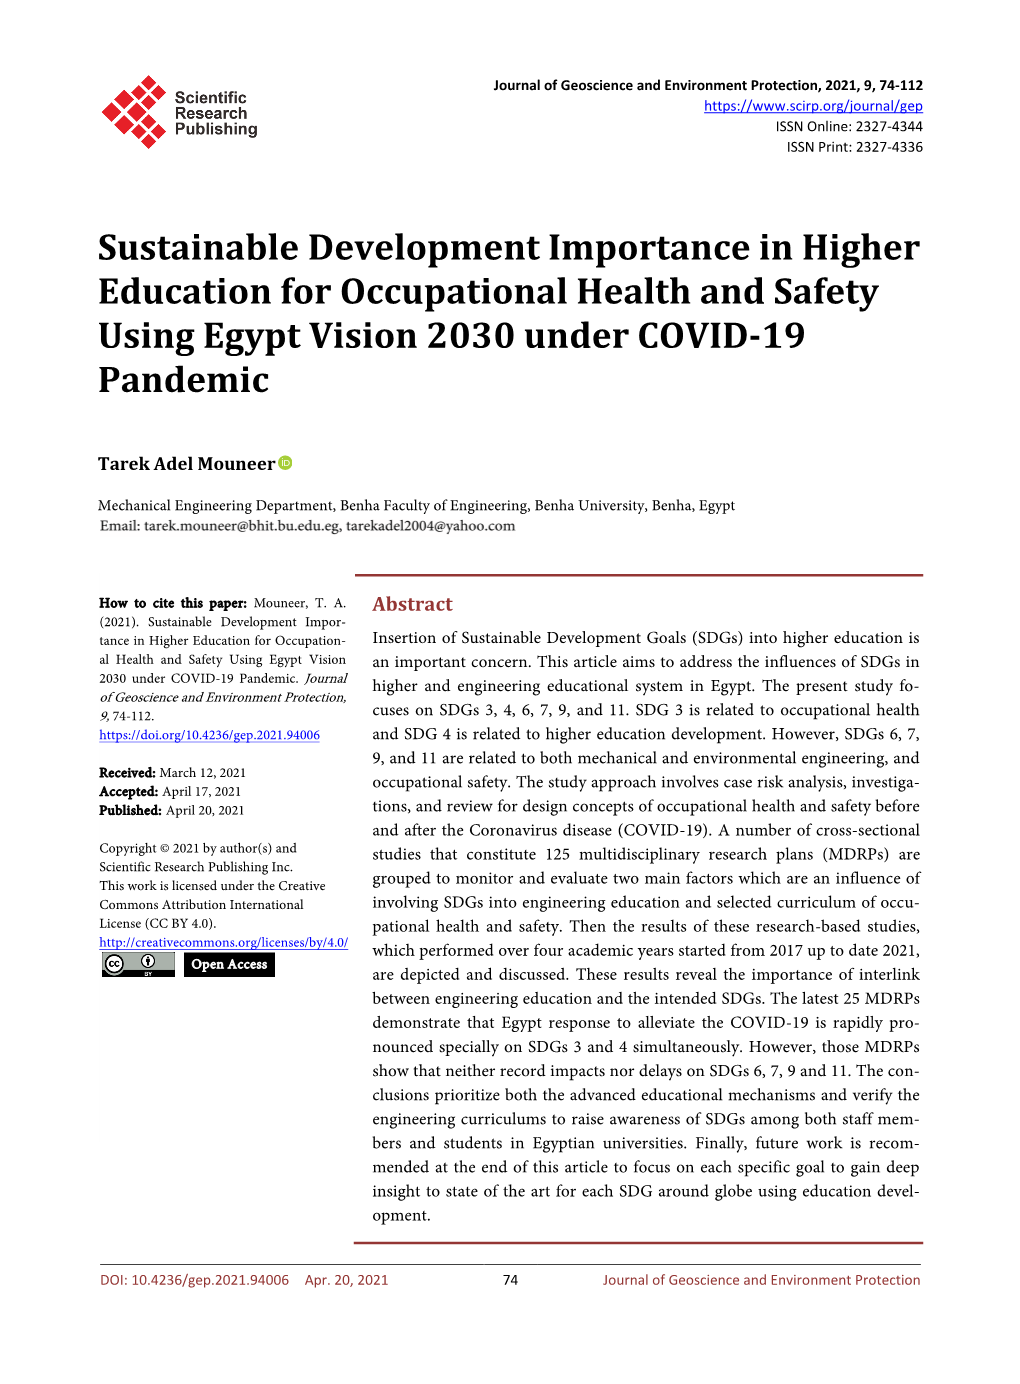 Sustainable Development Importance in Higher Education for Occupational Health and Safety Using Egypt Vision 2030 Under COVID-19 Pandemic